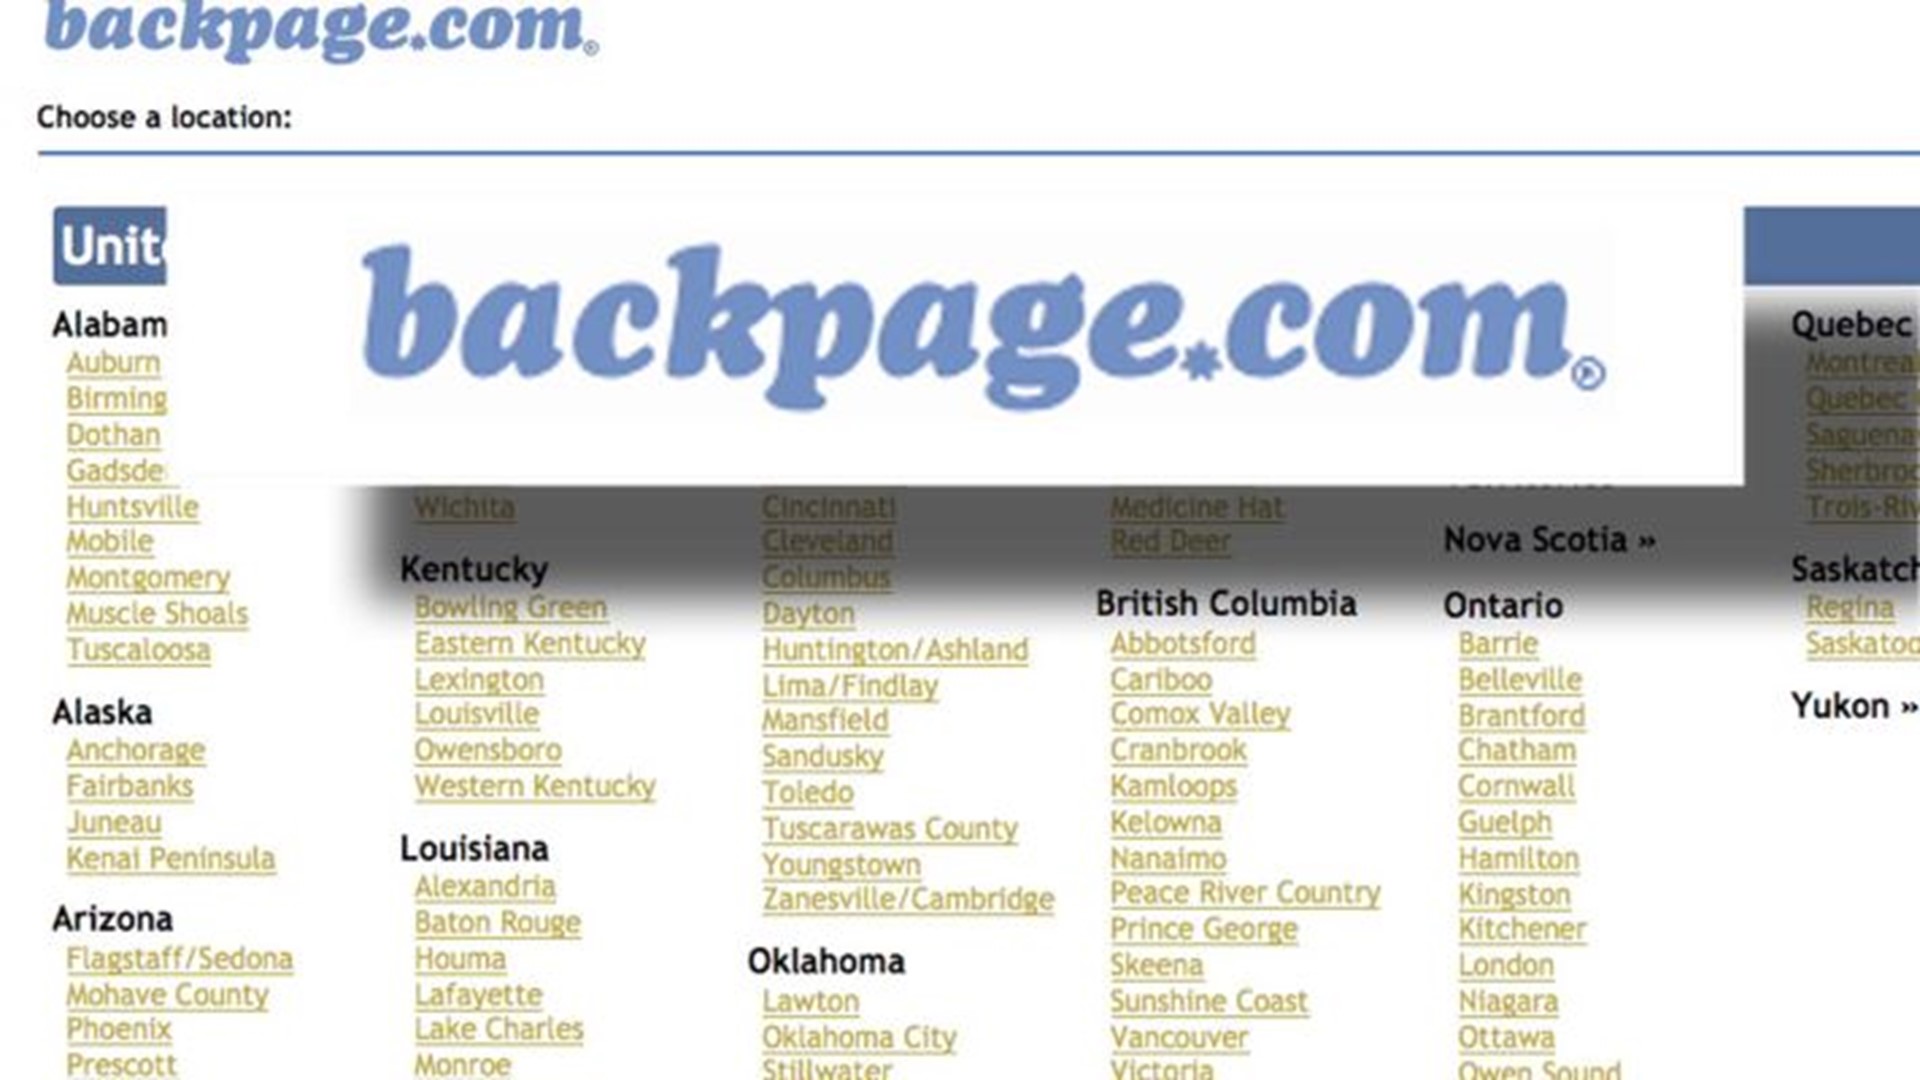 donna hannum recommends little rock backpage personals pic